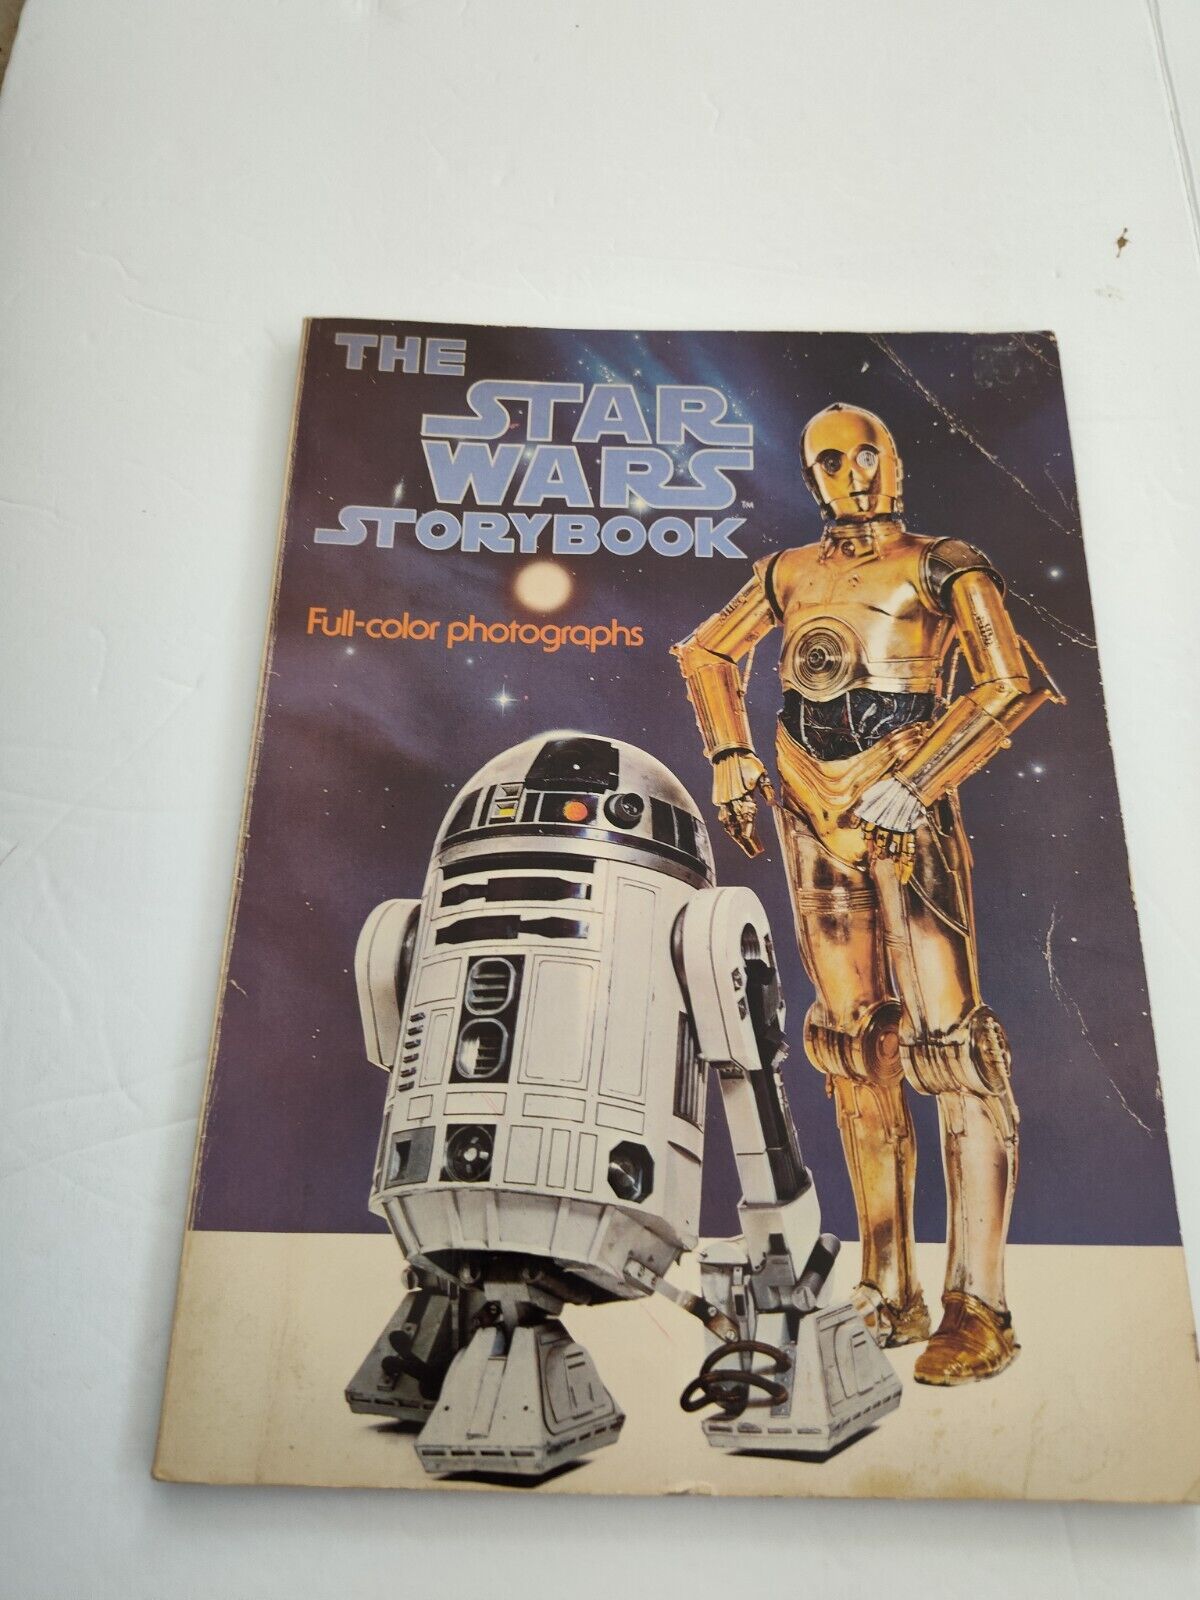 1978 THE STAR WARS STORYBOOK FULL-COLOR PHOTOGRAPHYS